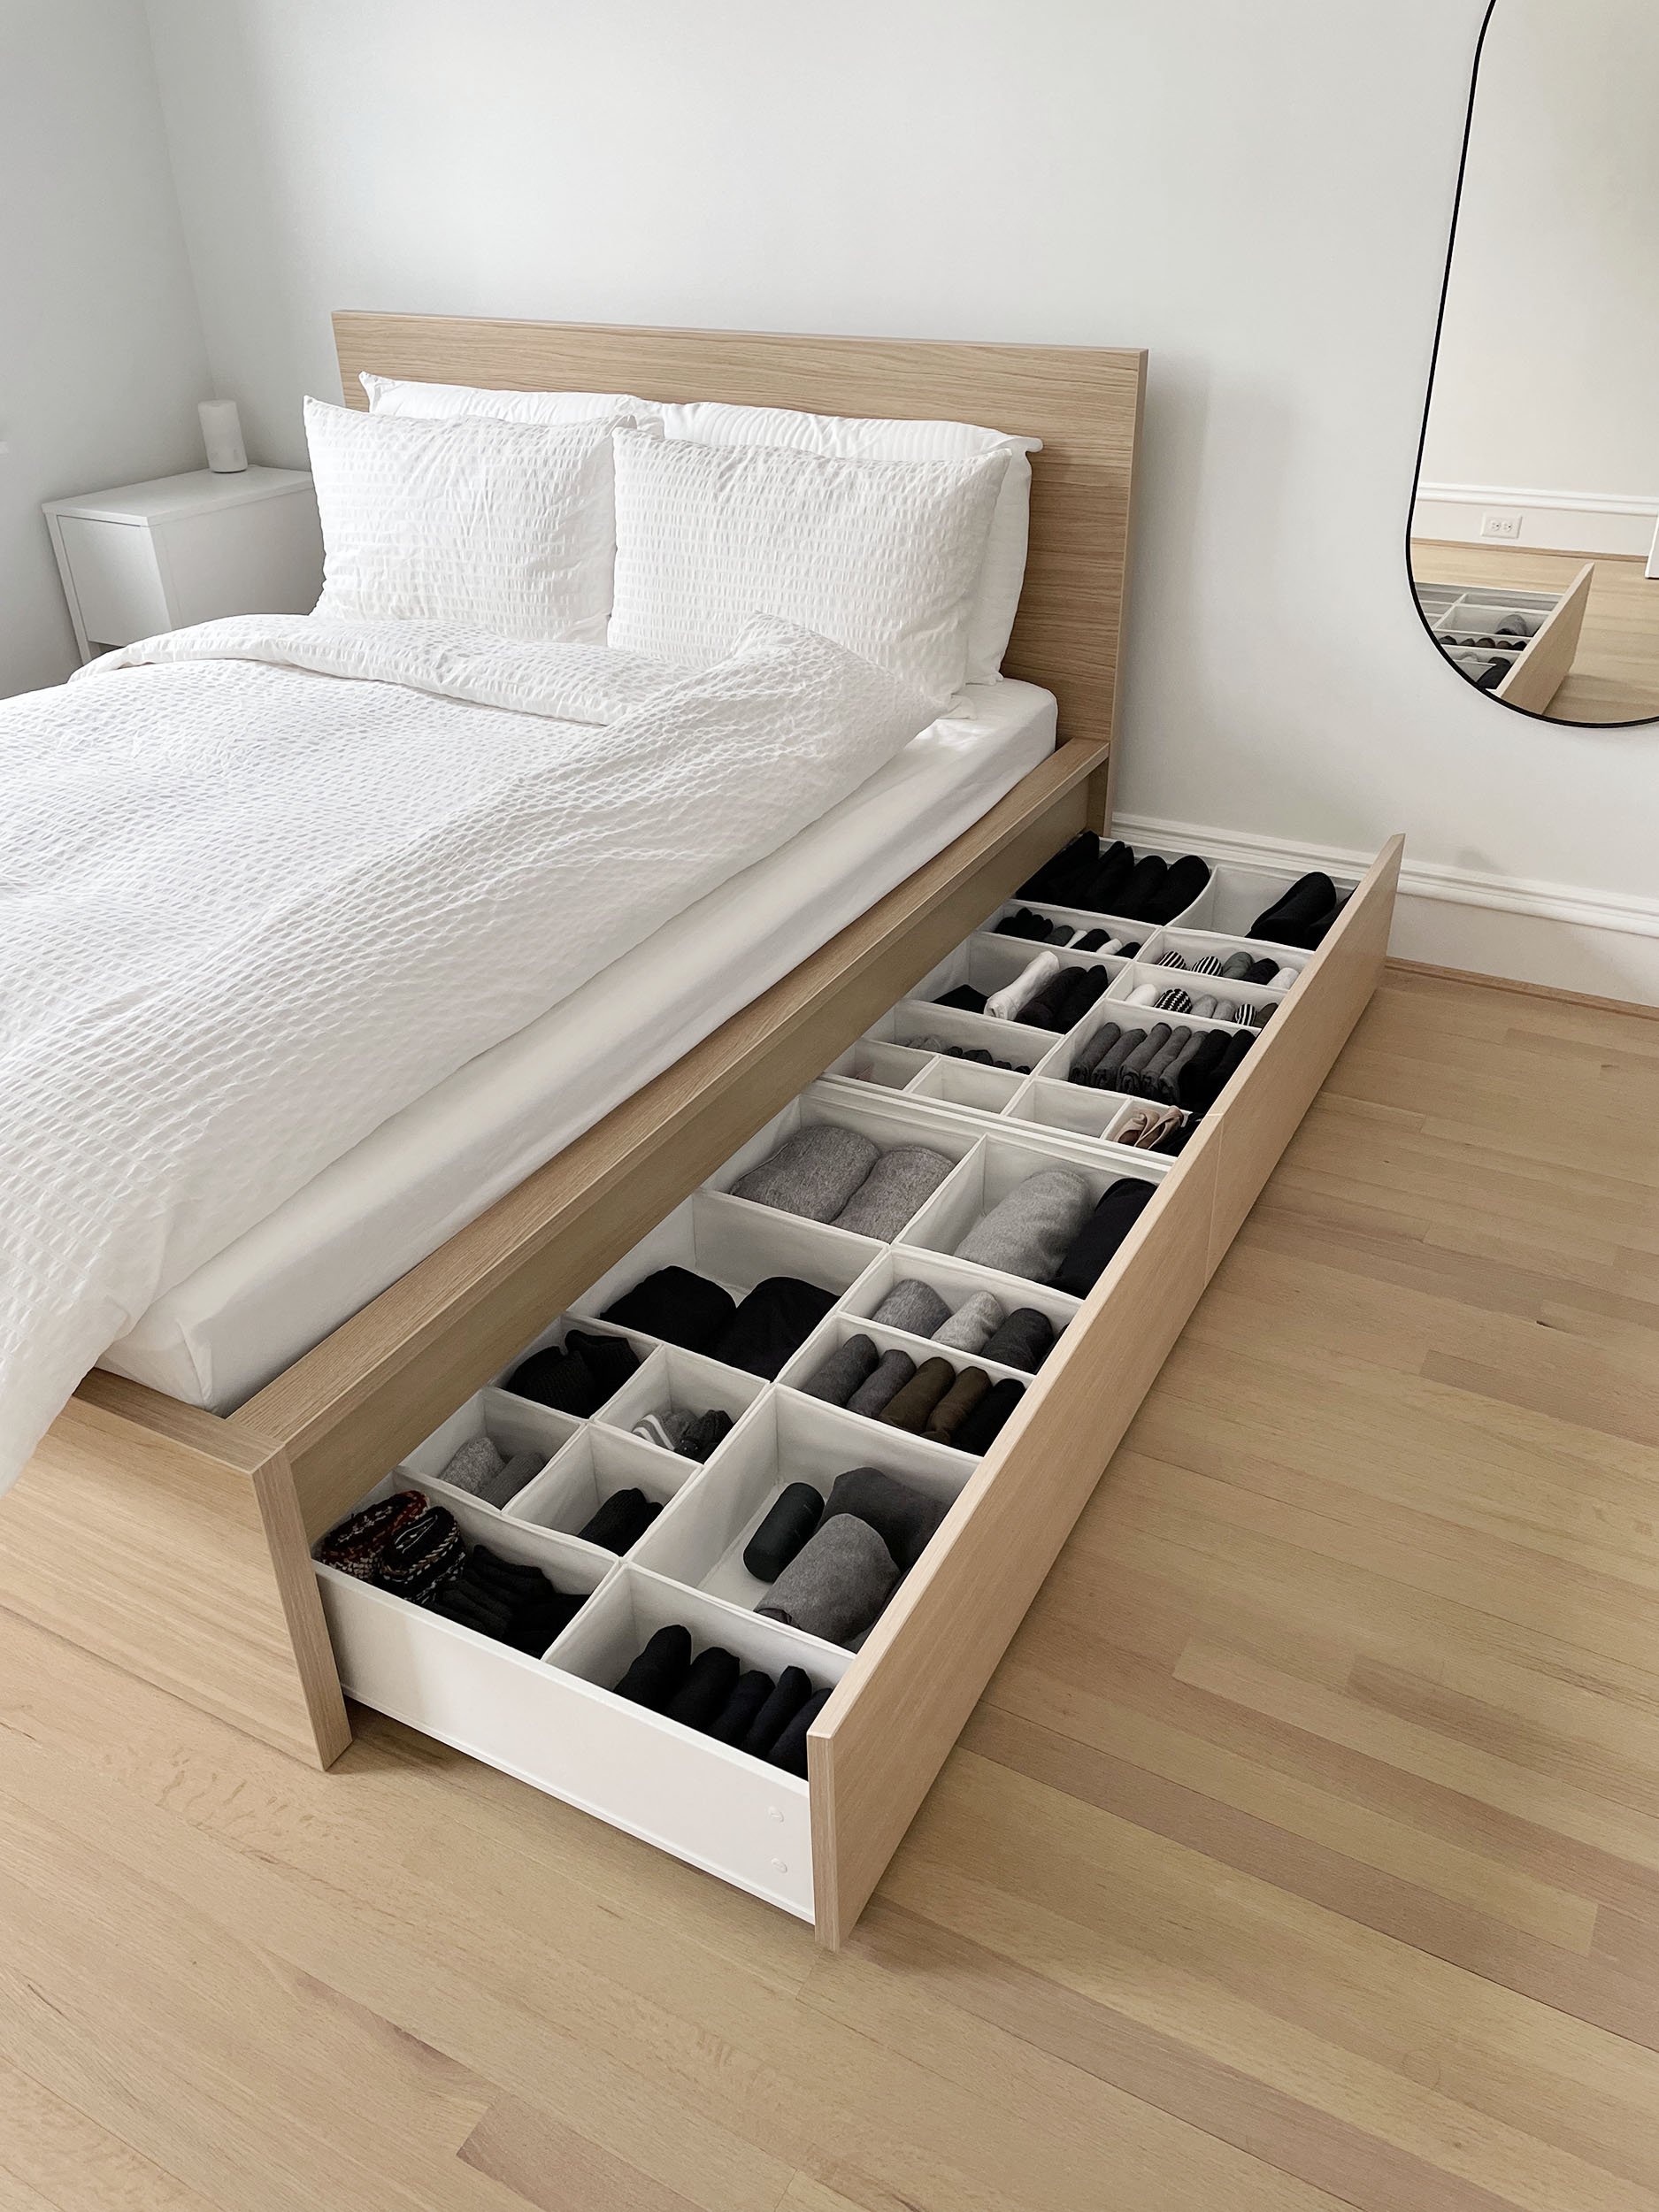 storage space with pull-out drawers under the bed